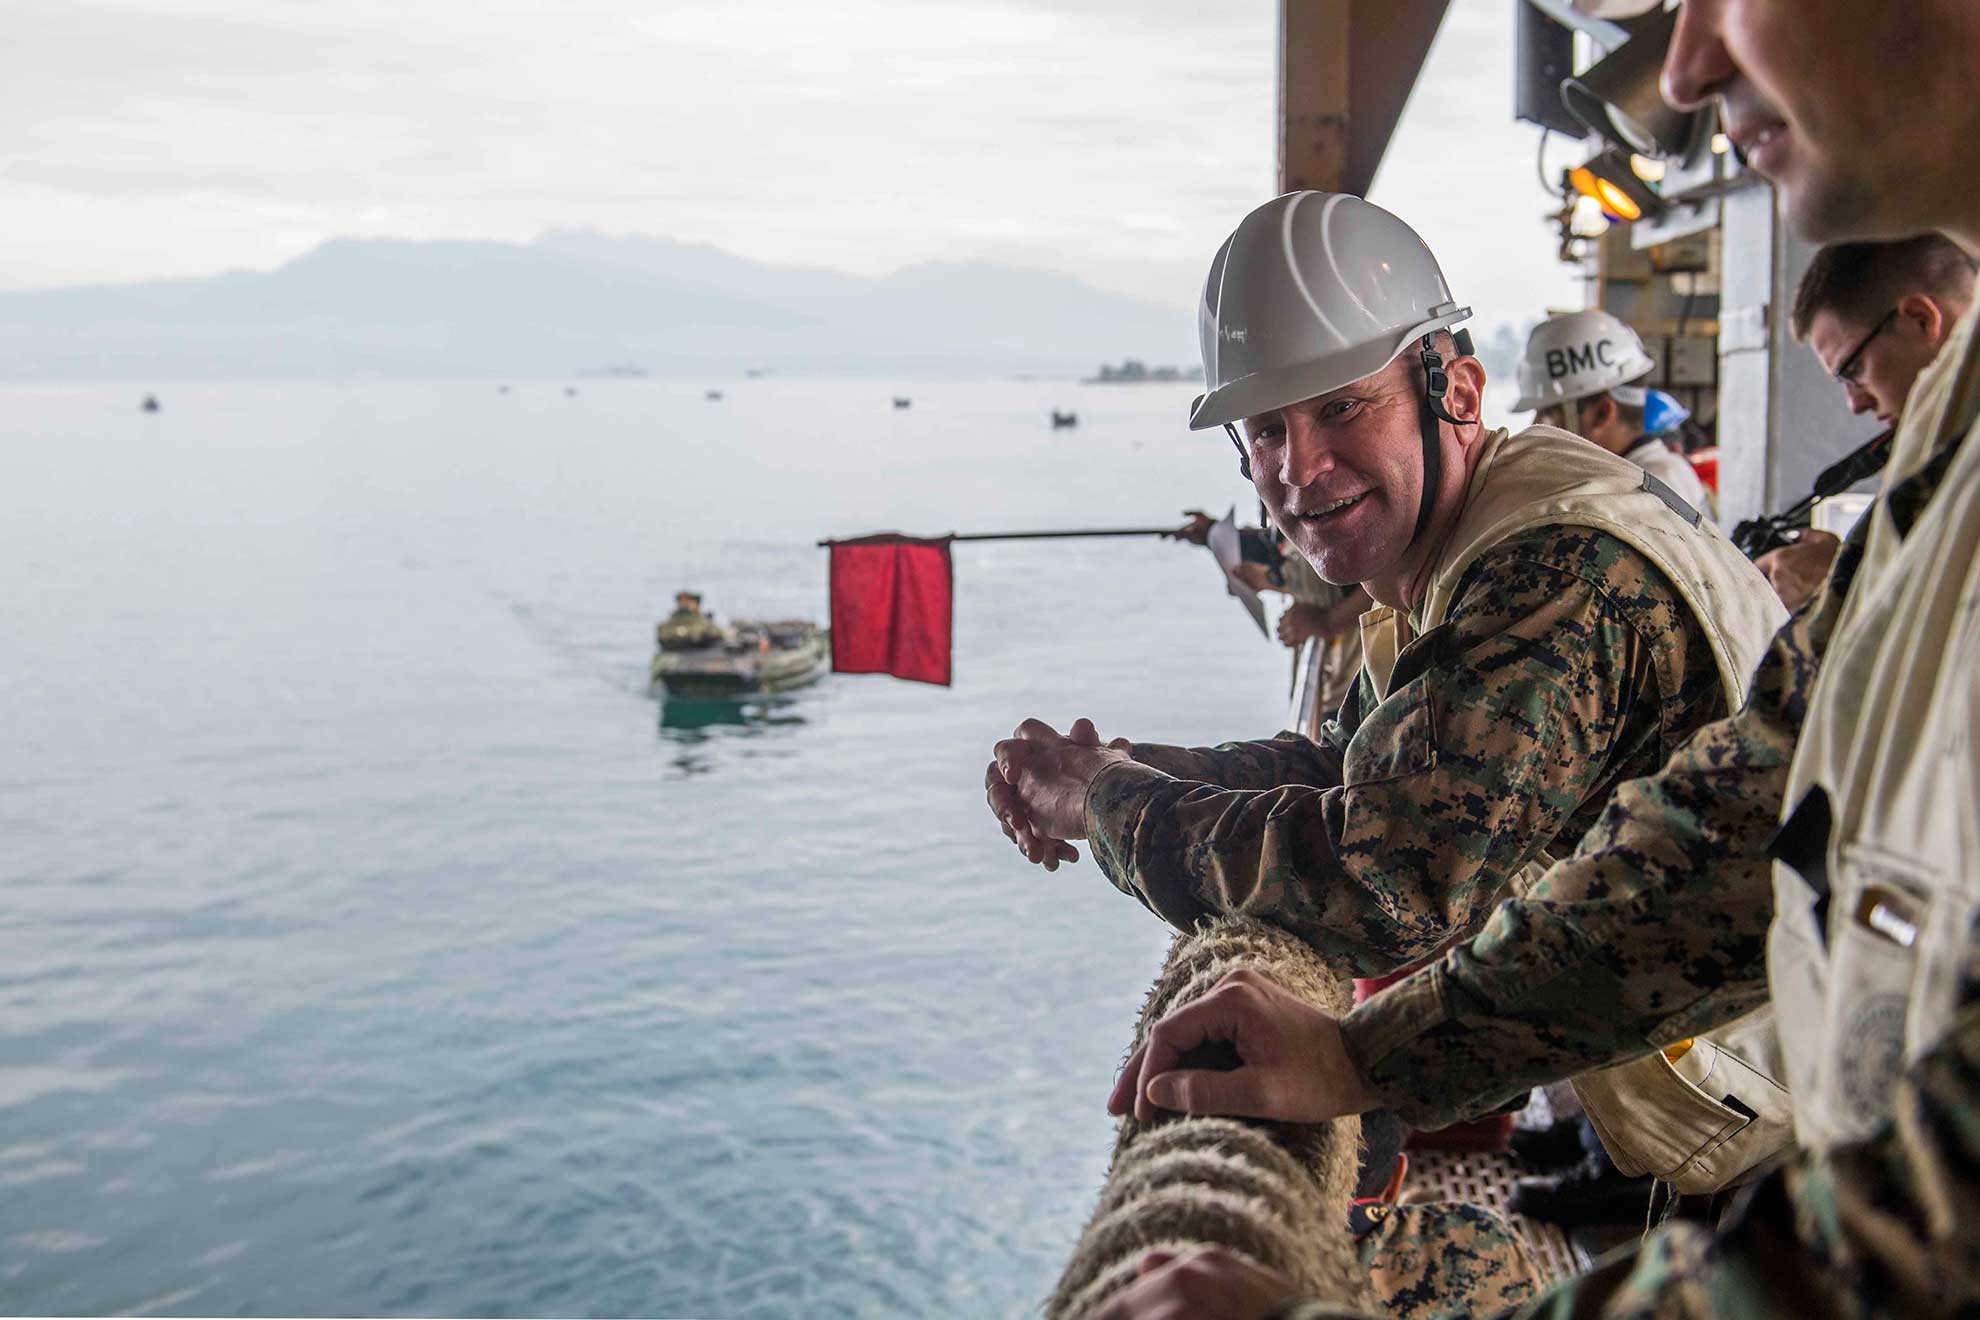 Subic Bay Republic of the Philippines (Oct. 3, 2018) Brig. Gen. Chris A. McPhillips, commanding general of the 3rd Marine Expeditionary Brigade, observes Marines attached to the 31st Marine Expeditionary Unit (MEU) and the Japan Ground Self-Defense Force (JGSDF) Amphibious Rapid Deployment Brigade (ARDB) conduct assault amphibious vehicle operations with the amphibious dock landing ship USS Ashland (LSD 48) as part of a training exercise for KAMANDAG 2 -- U.S. Navy photo by MCS2 Joshua Mortensen. -